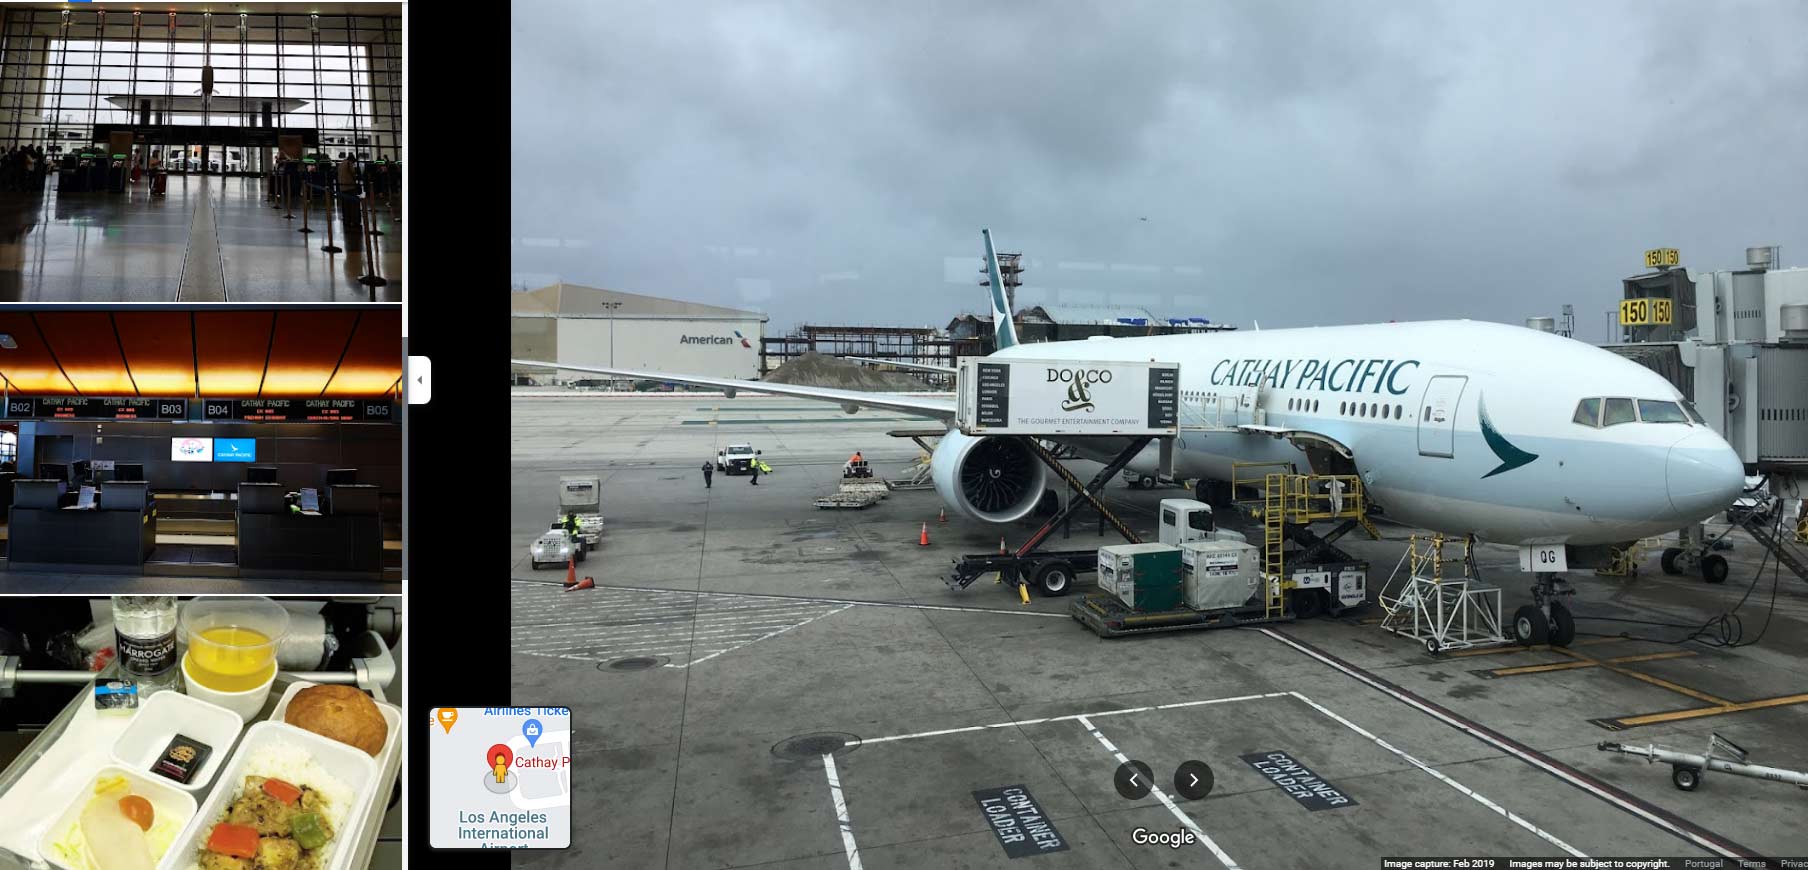 Cathay Pacific lax airlines